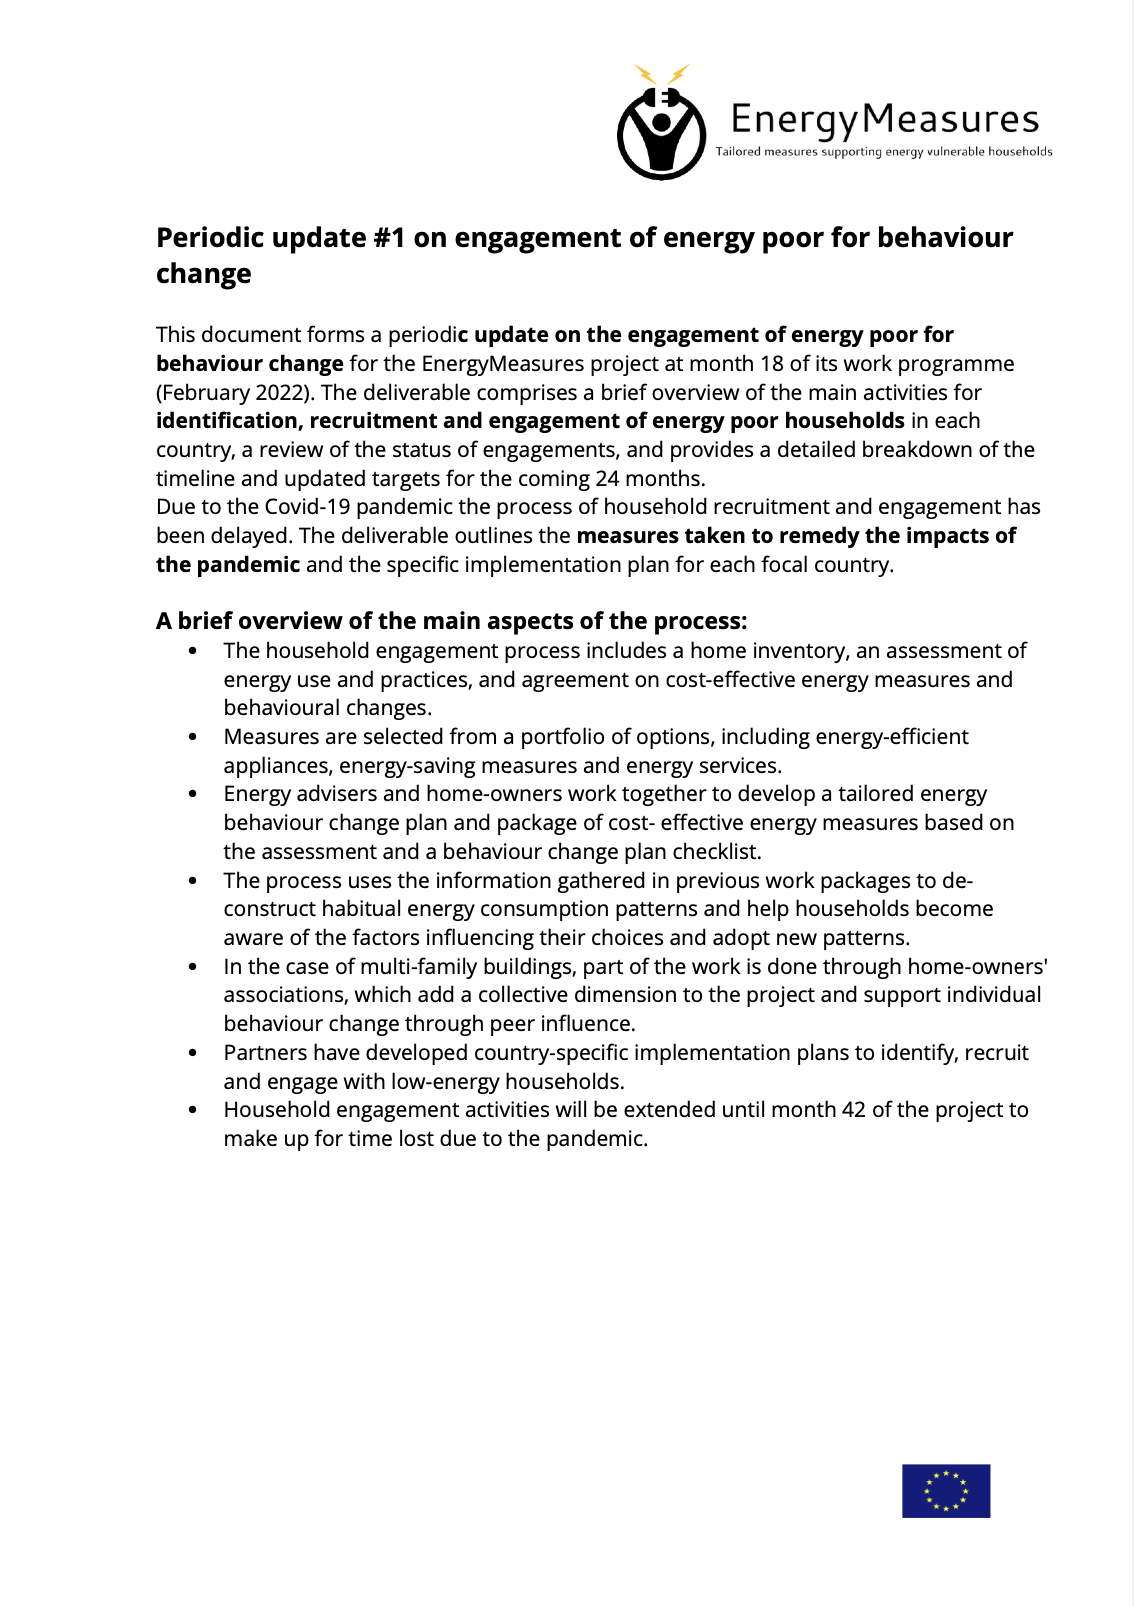 Periodic update #1 on engagement of energy poor for behaviour change